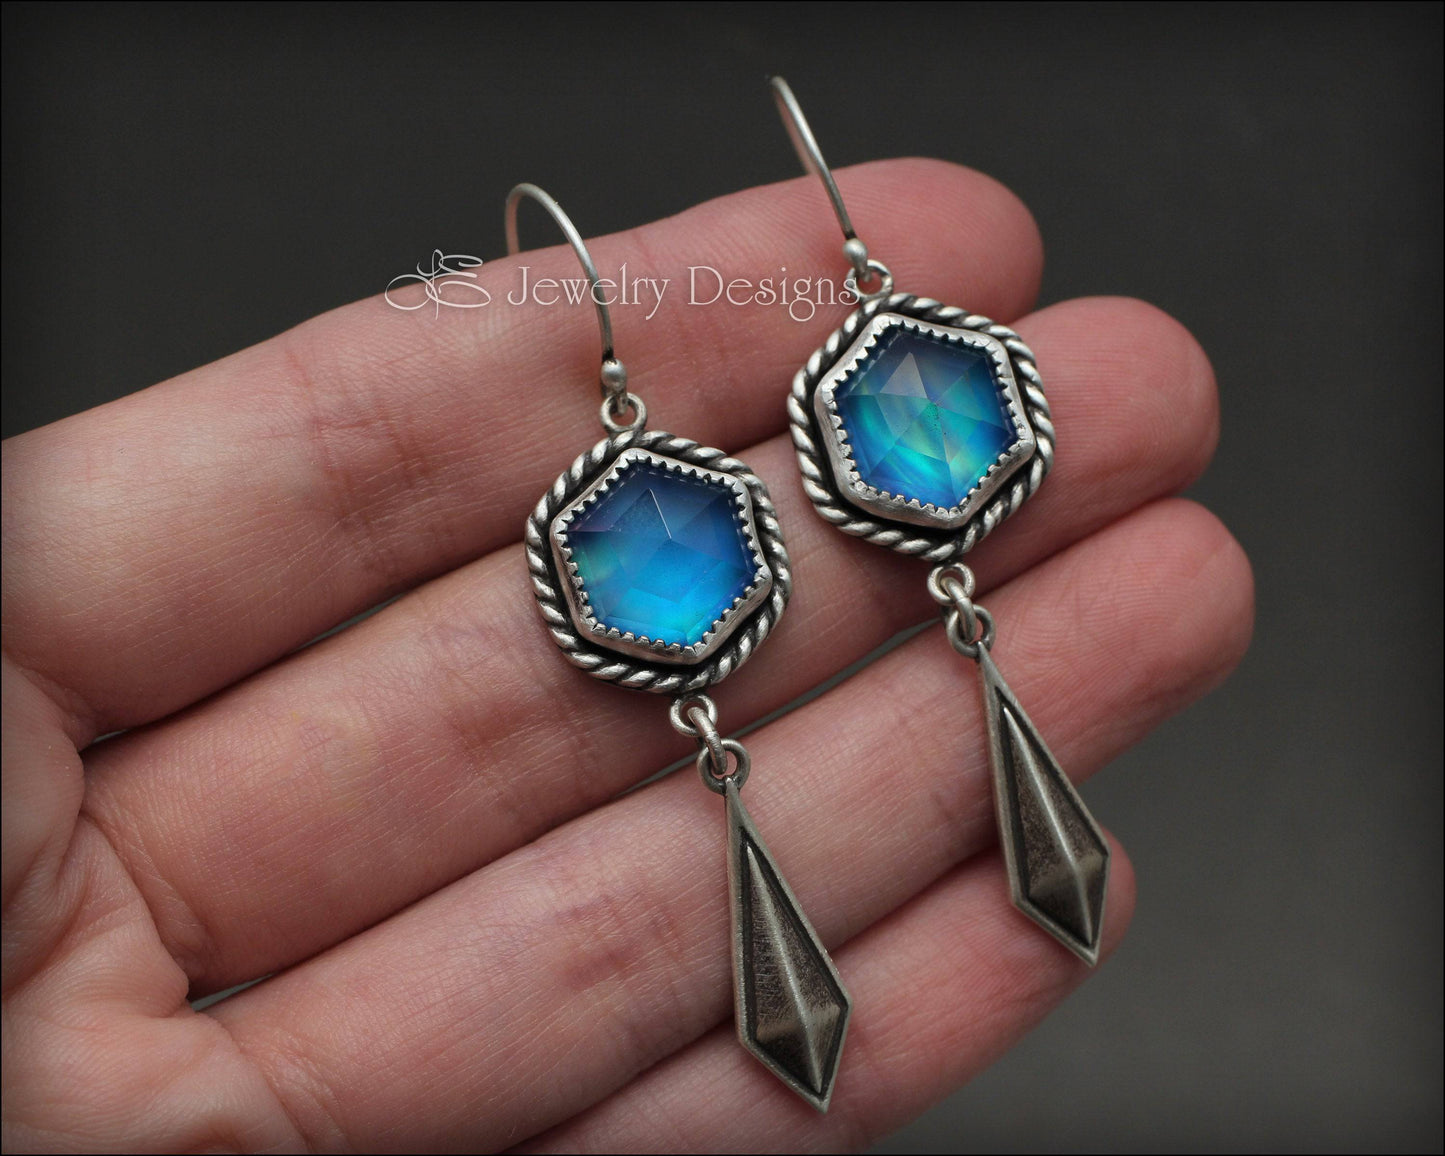 Load image into Gallery viewer, Rose Cut Hexagon Aurora Opal Earrings - LE Jewelry Designs
